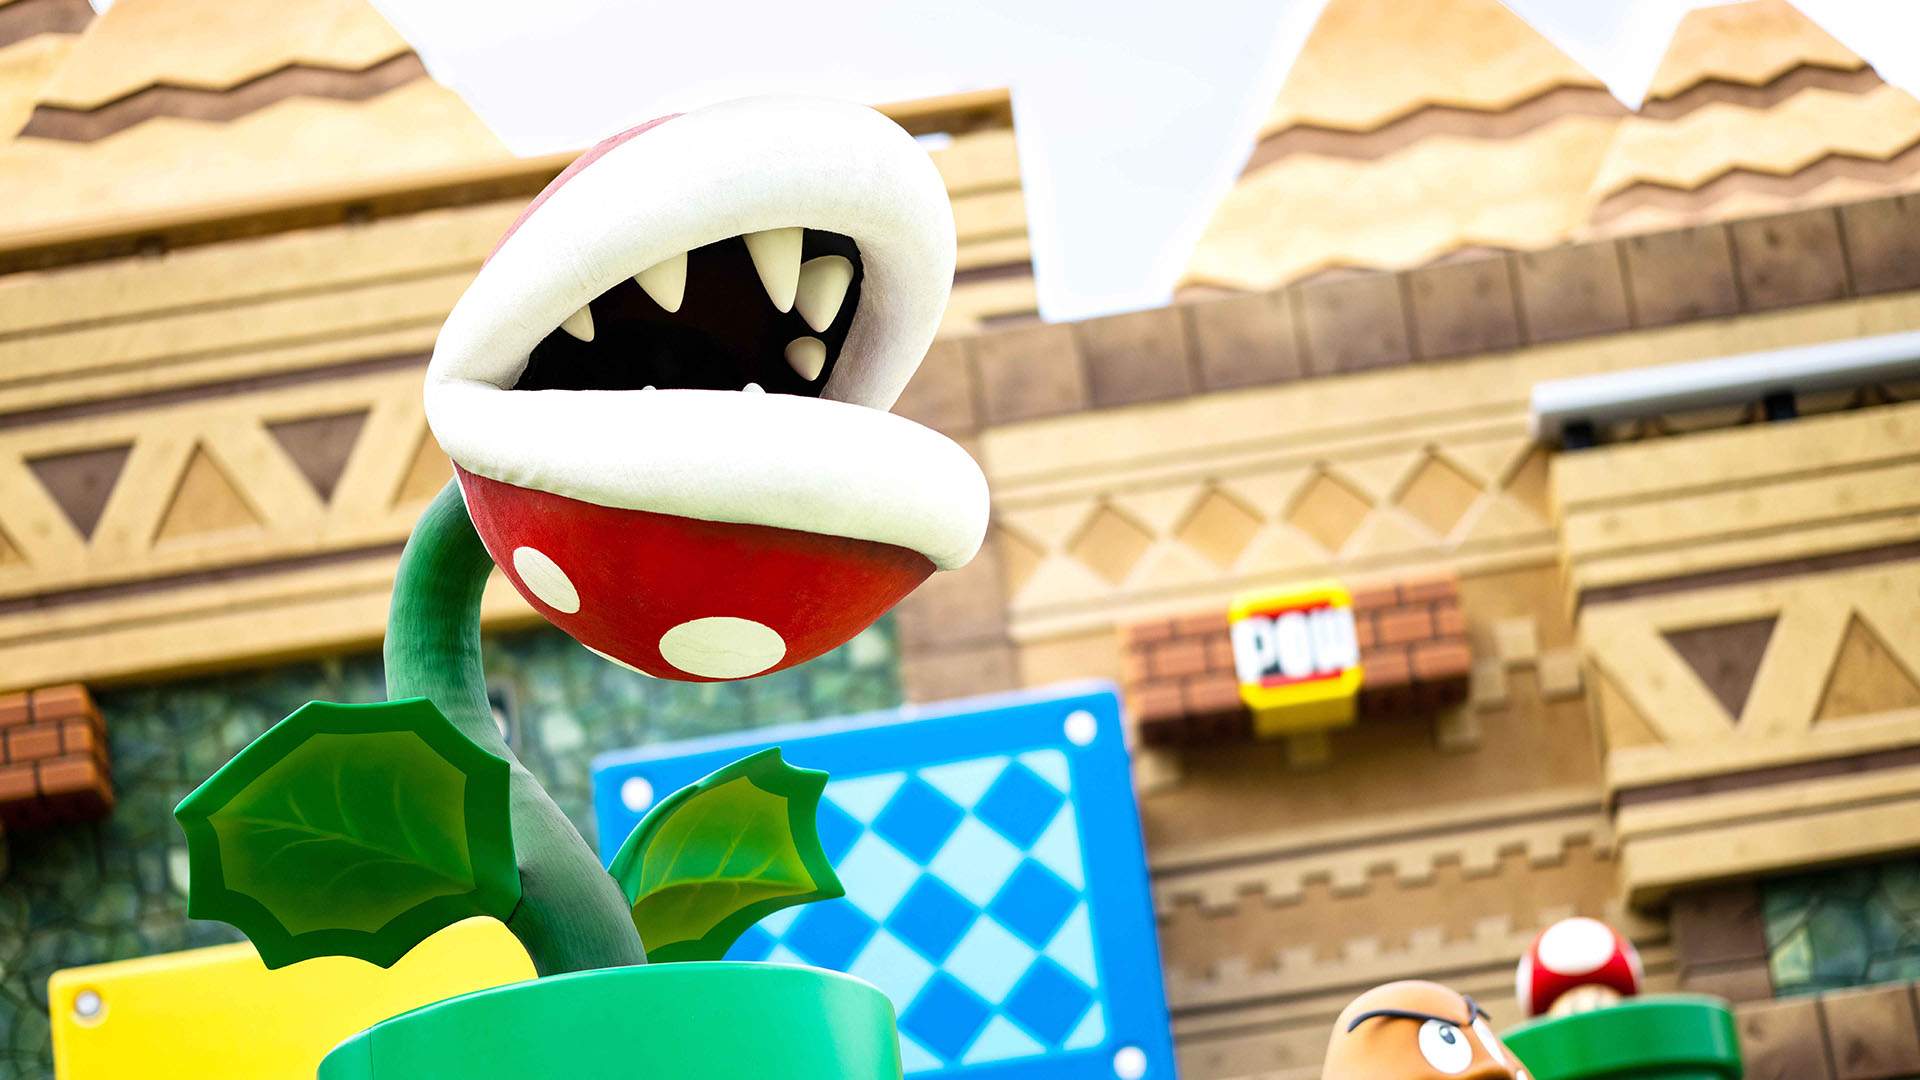 Now Open: Hollywood's New Super Nintendo Theme Park with IRL 'Mario Kart' Is Welcoming in Fans